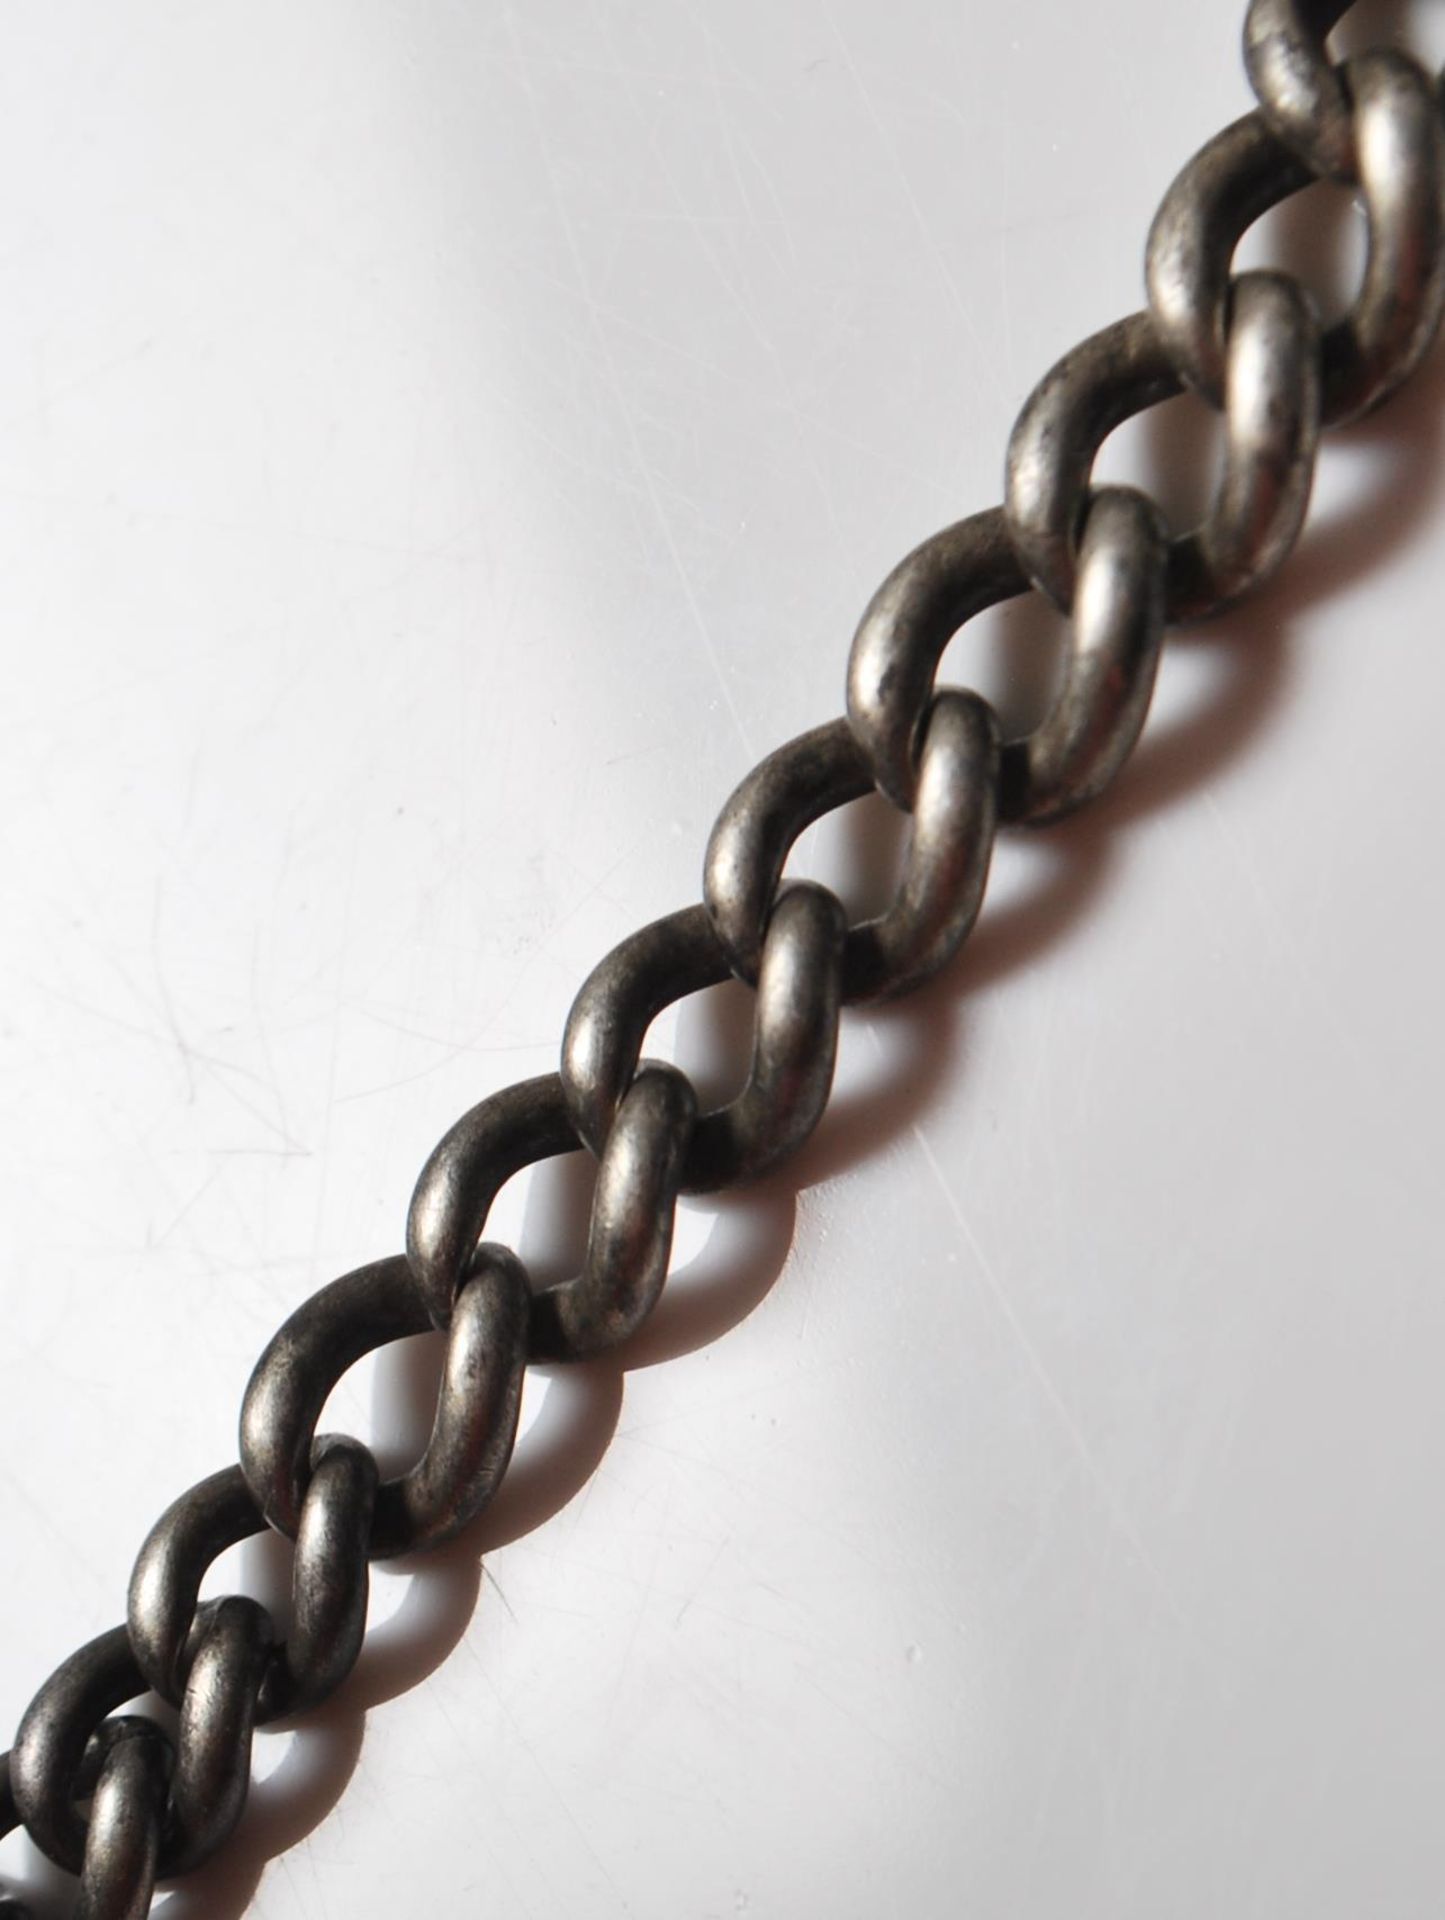 EARLY 20TH CENTURY SILVER POCKET WATCH CHAIN - Image 5 of 7